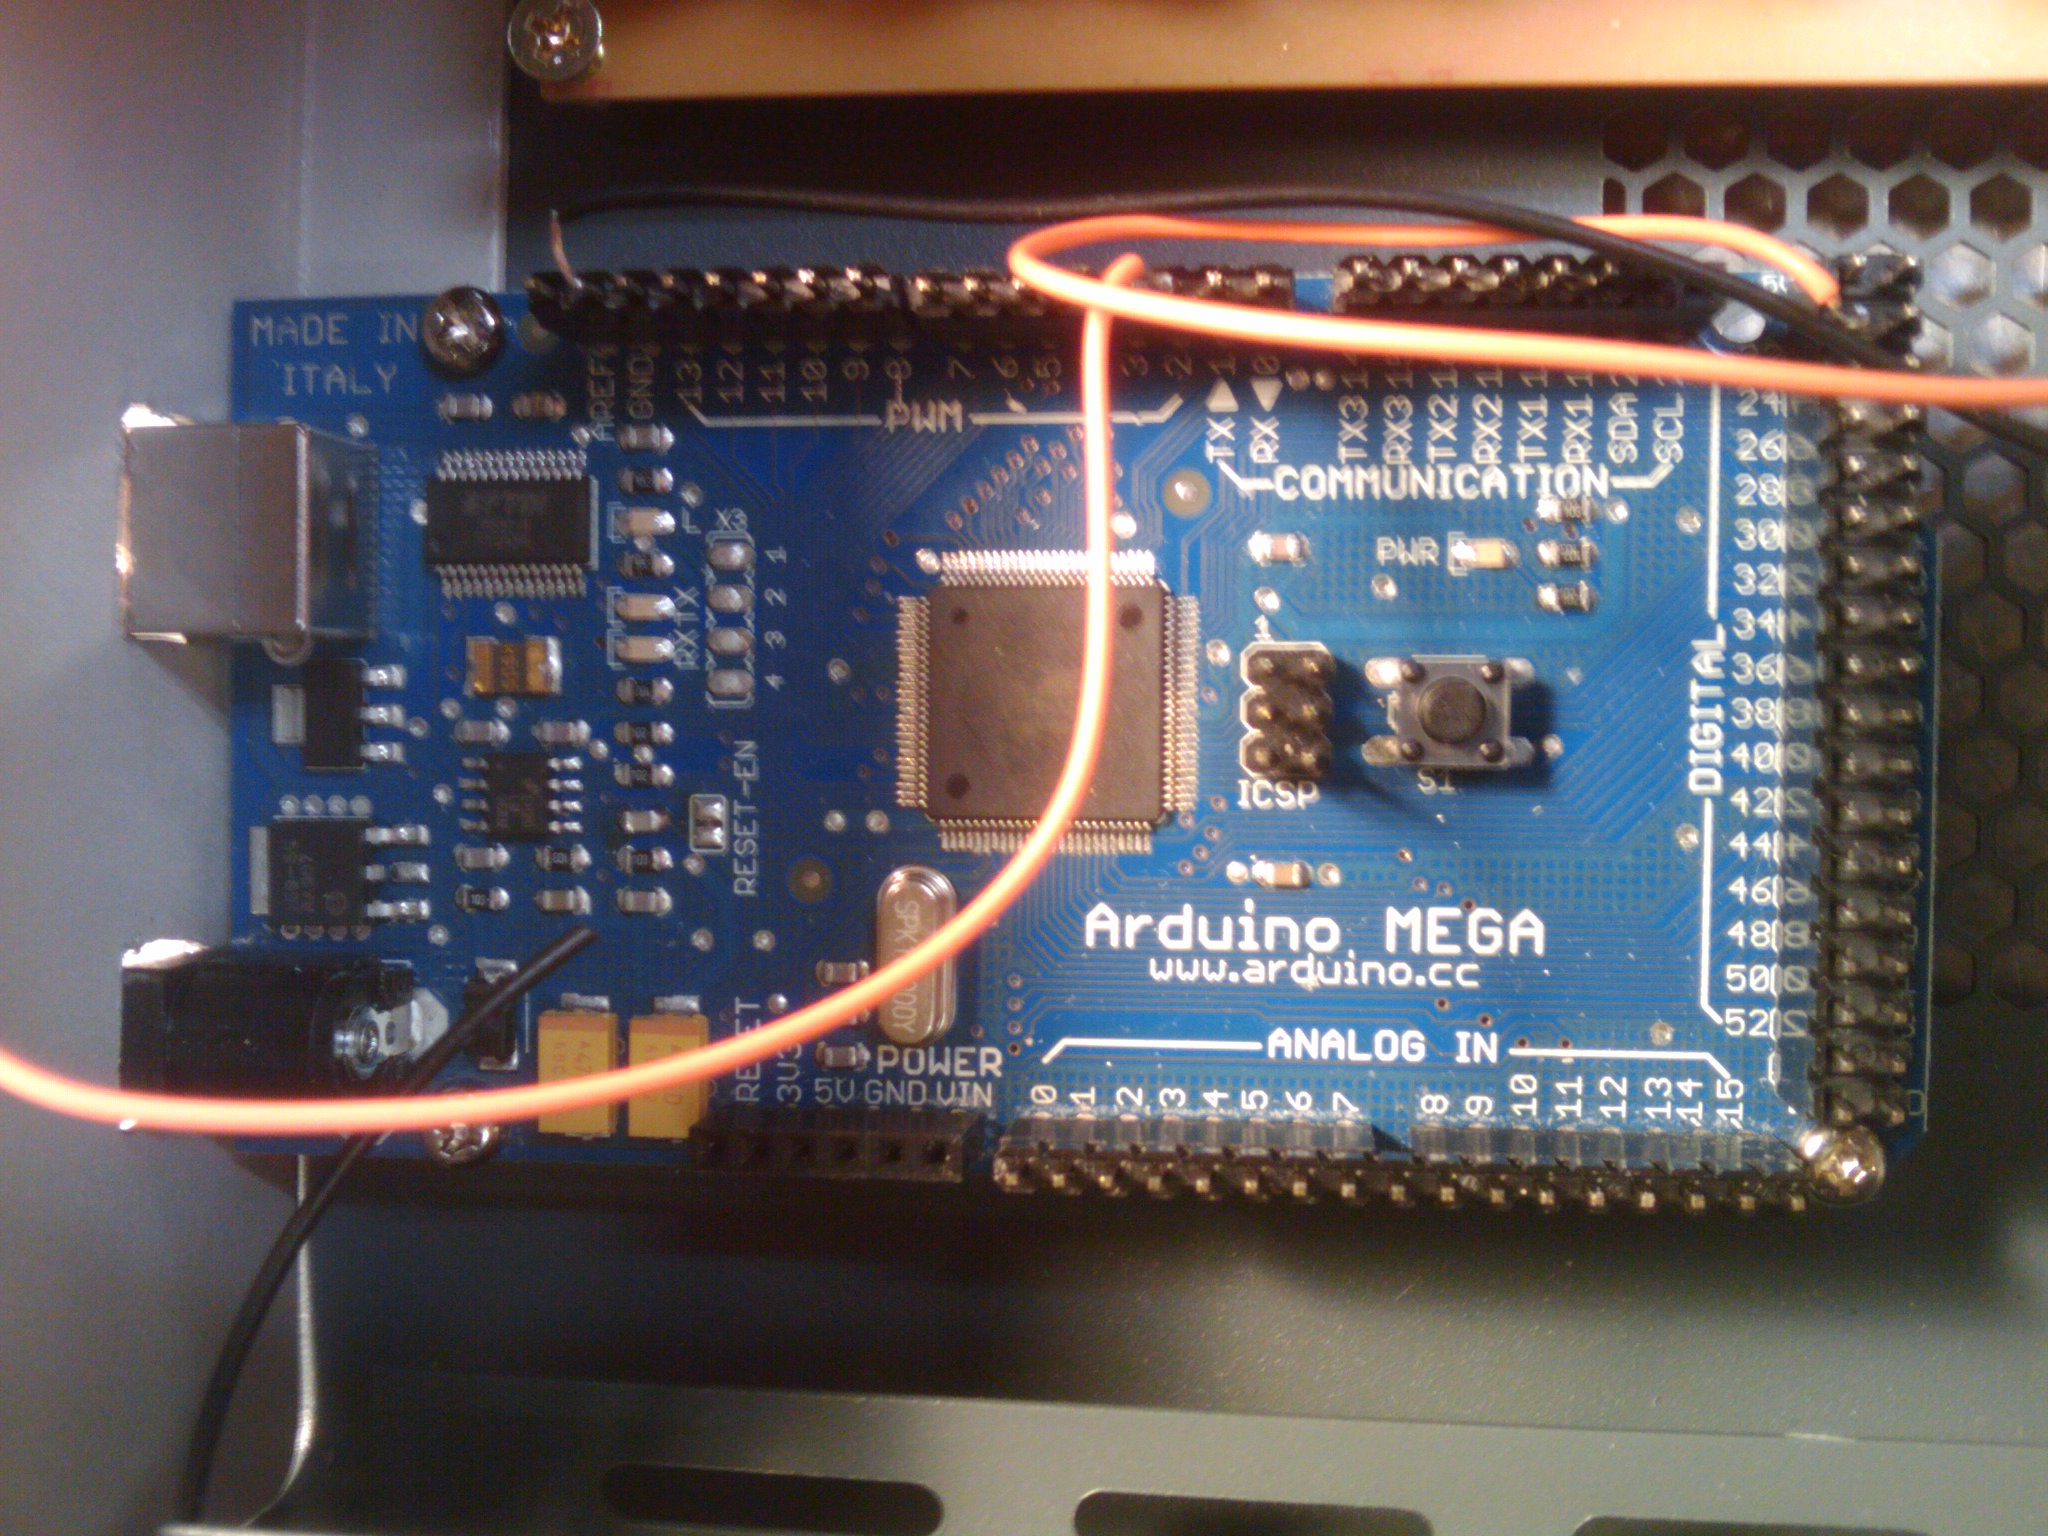 The controller open, showing the Arduino board implementation of the ATMega1280